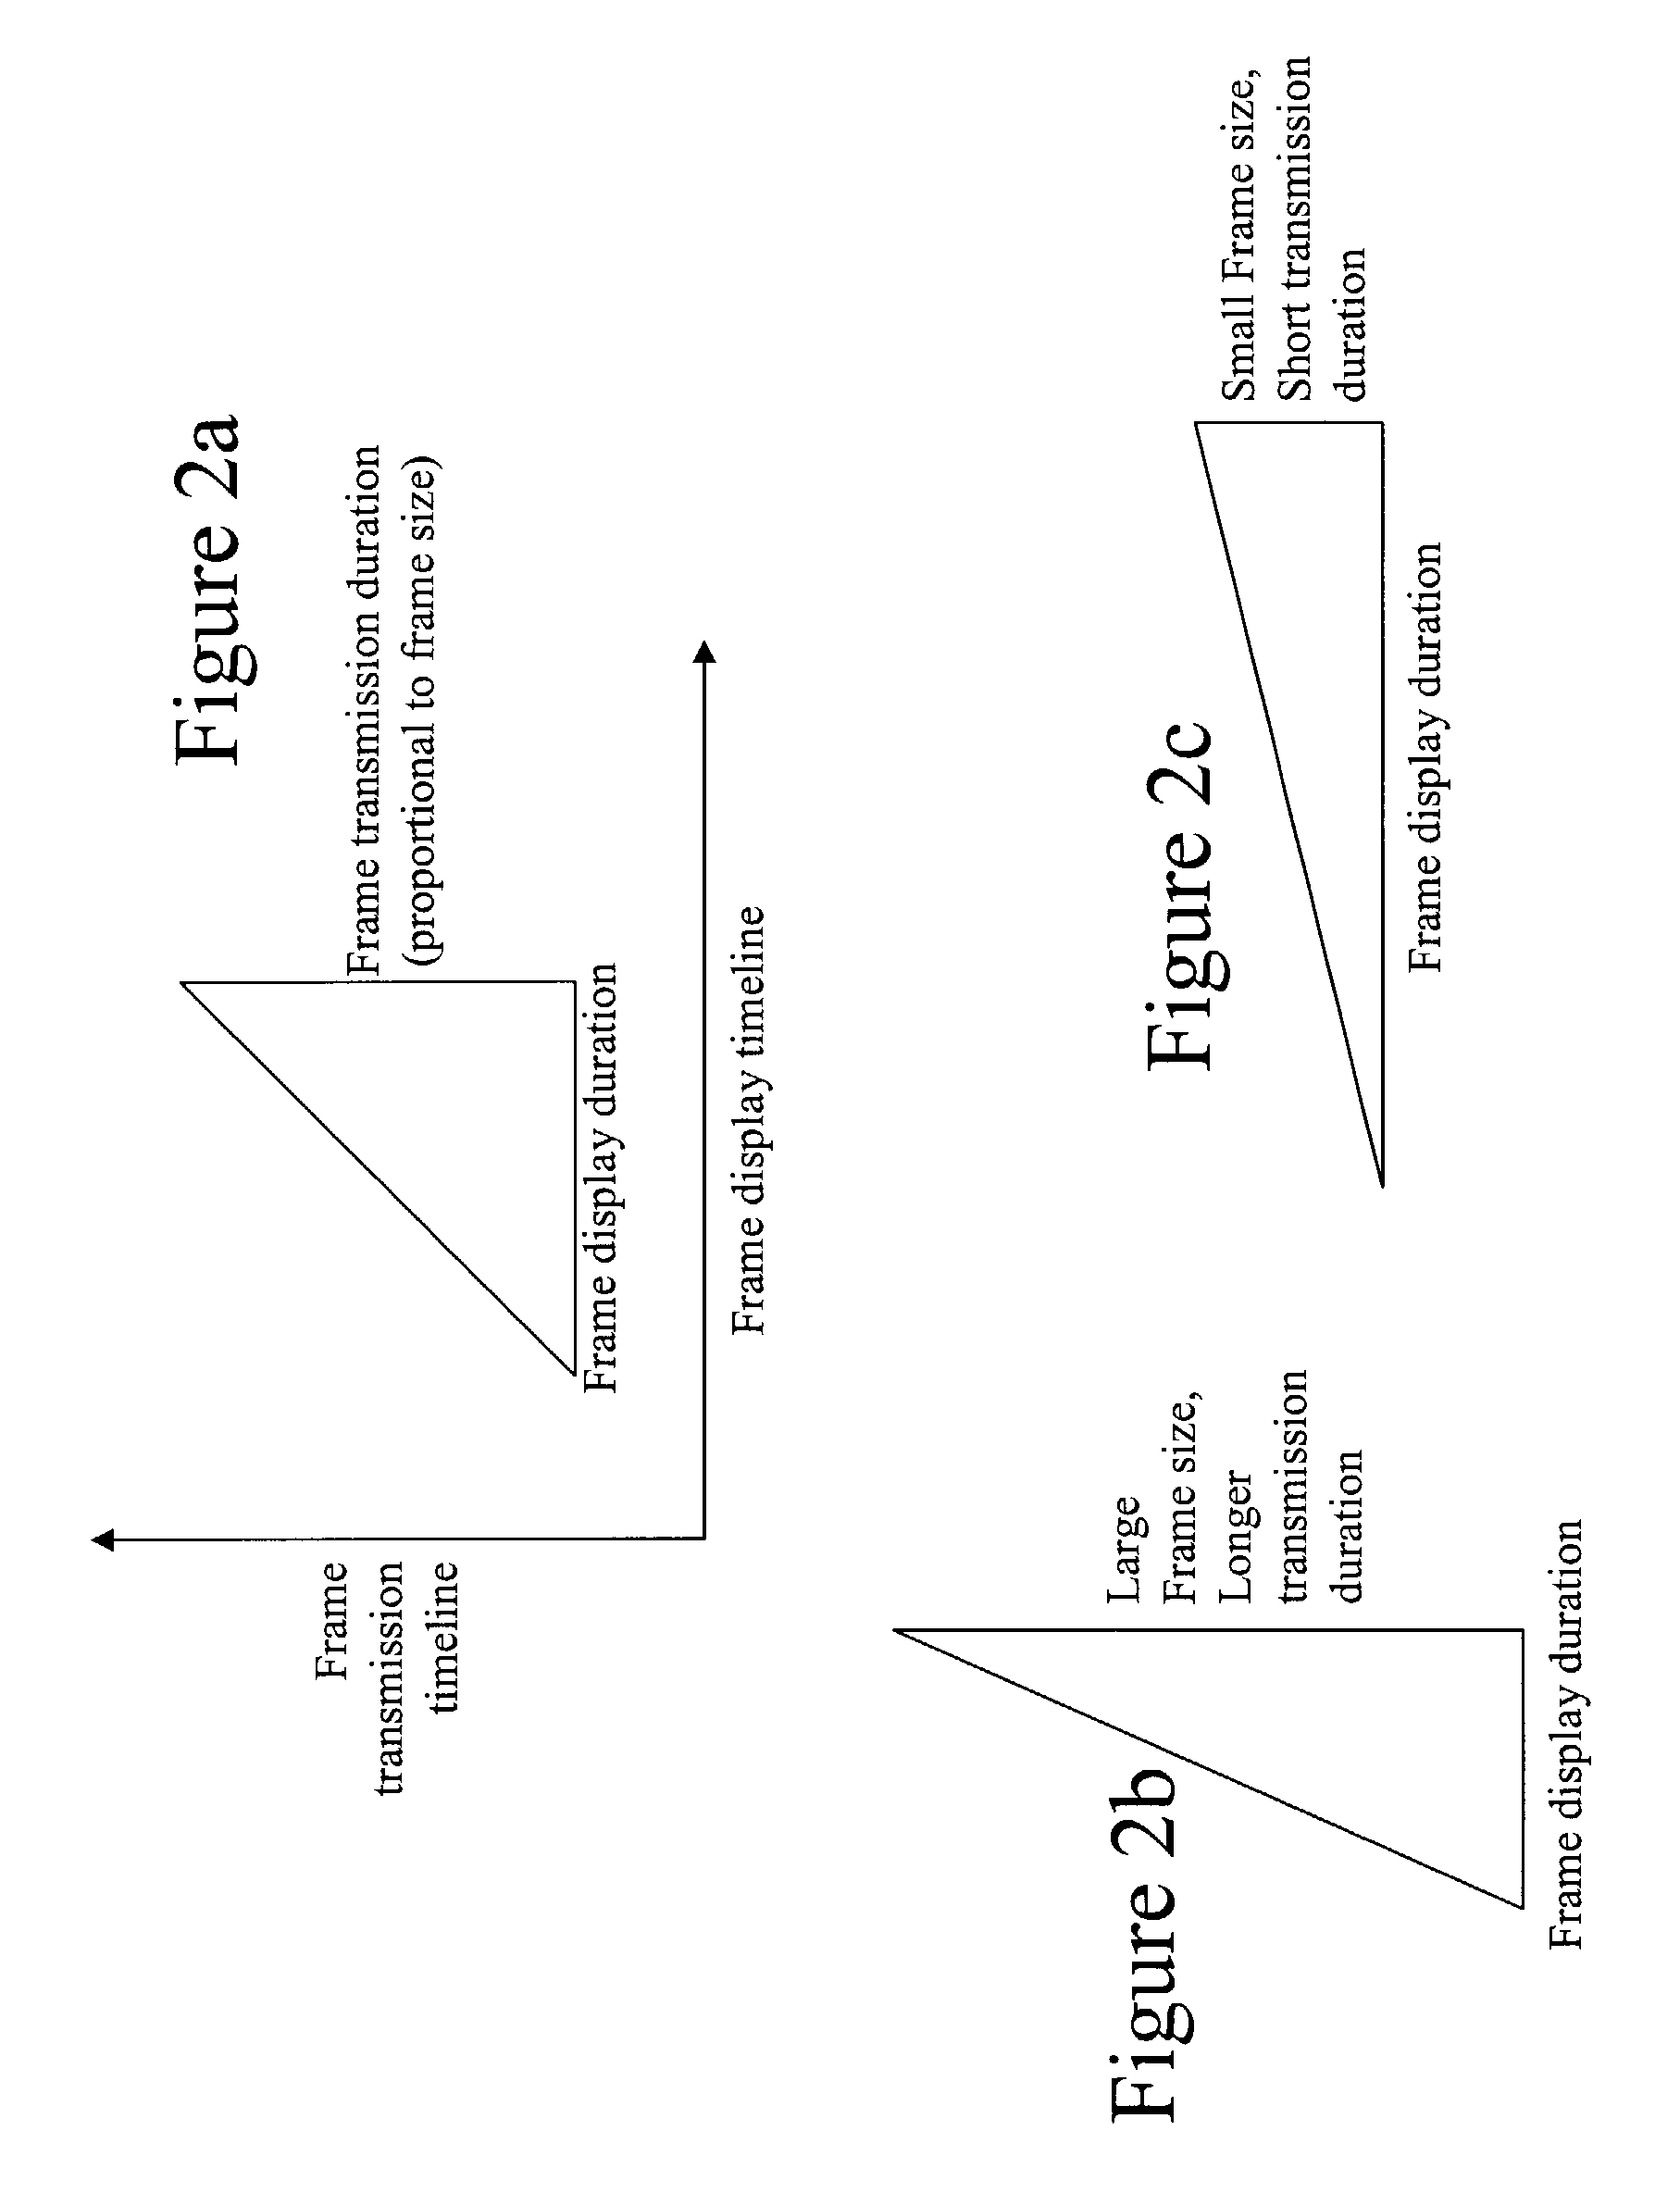 Method of performing rate control for a compression system